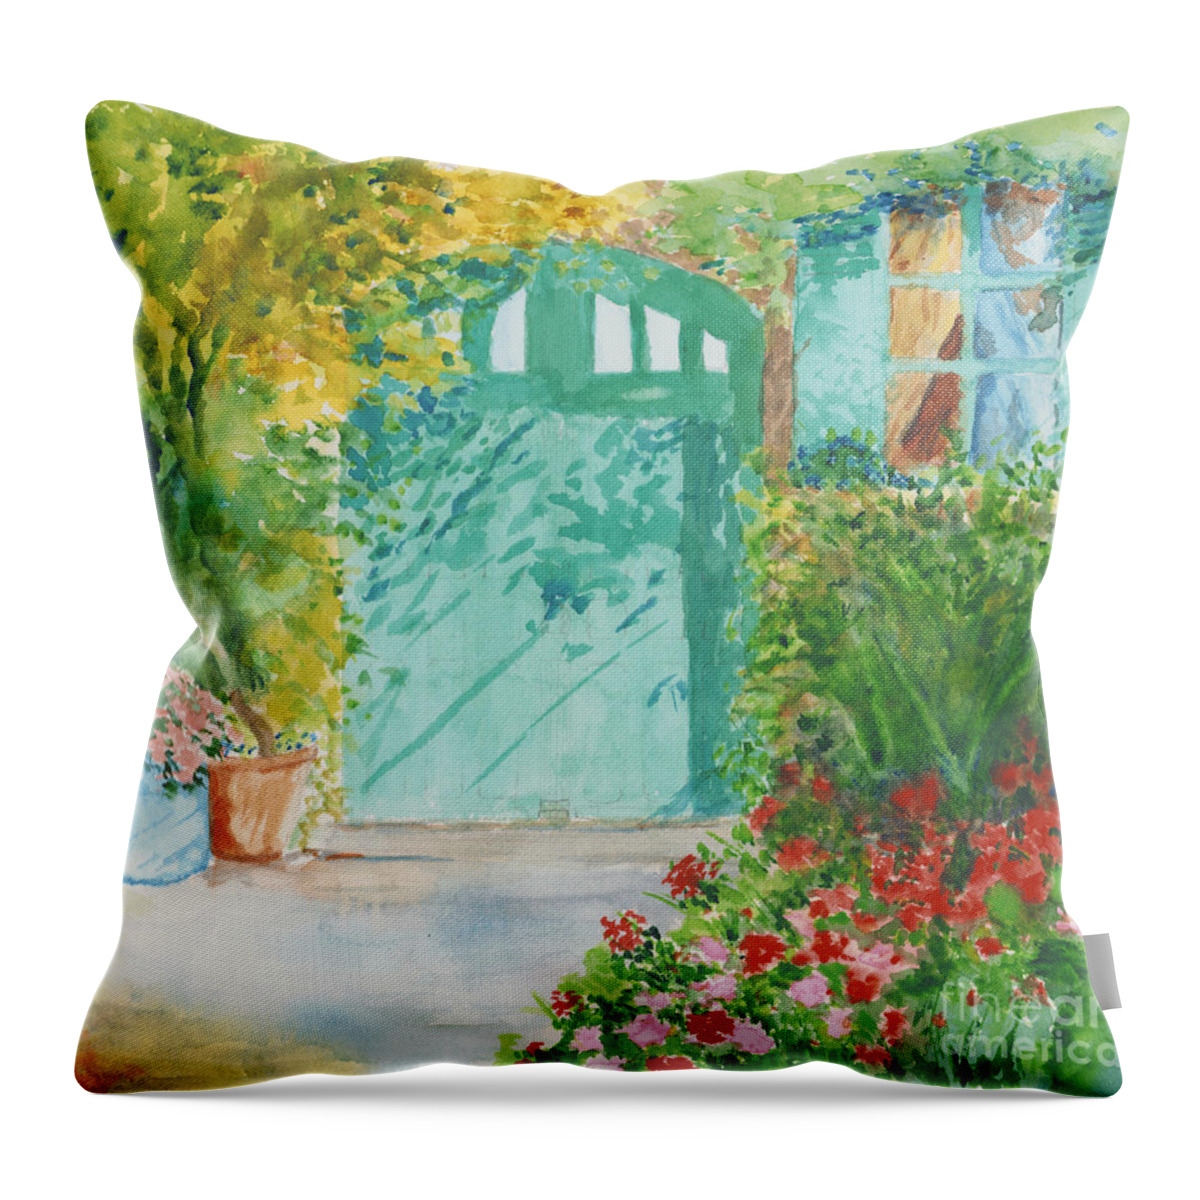 Water Throw Pillow featuring the painting Breeze by Loretta